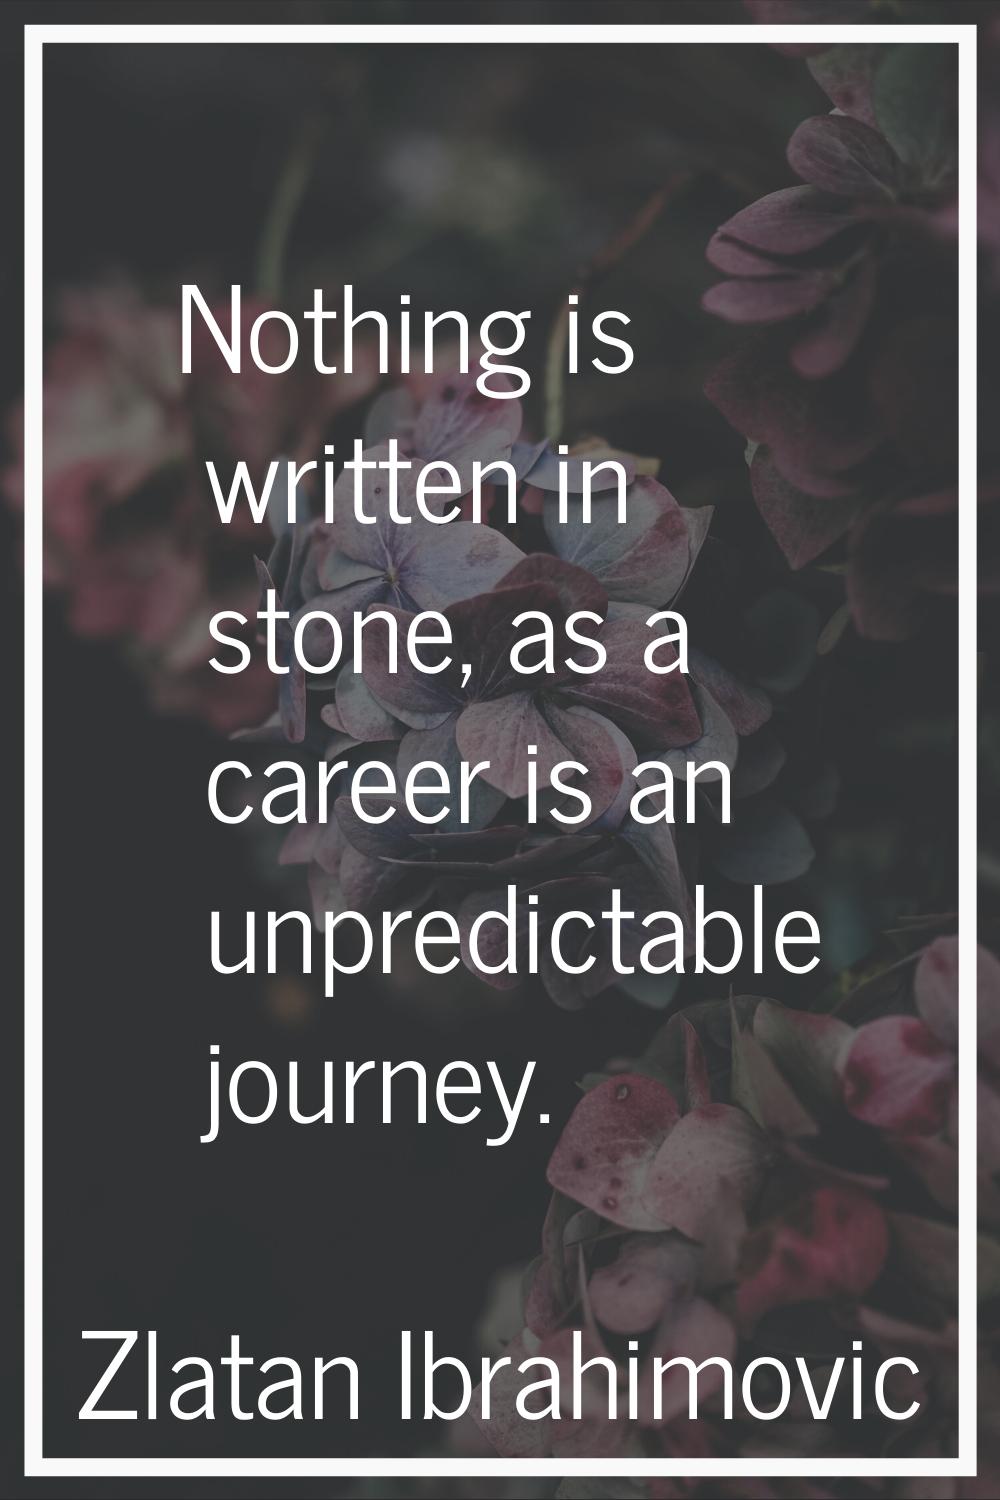 Nothing is written in stone, as a career is an unpredictable journey.